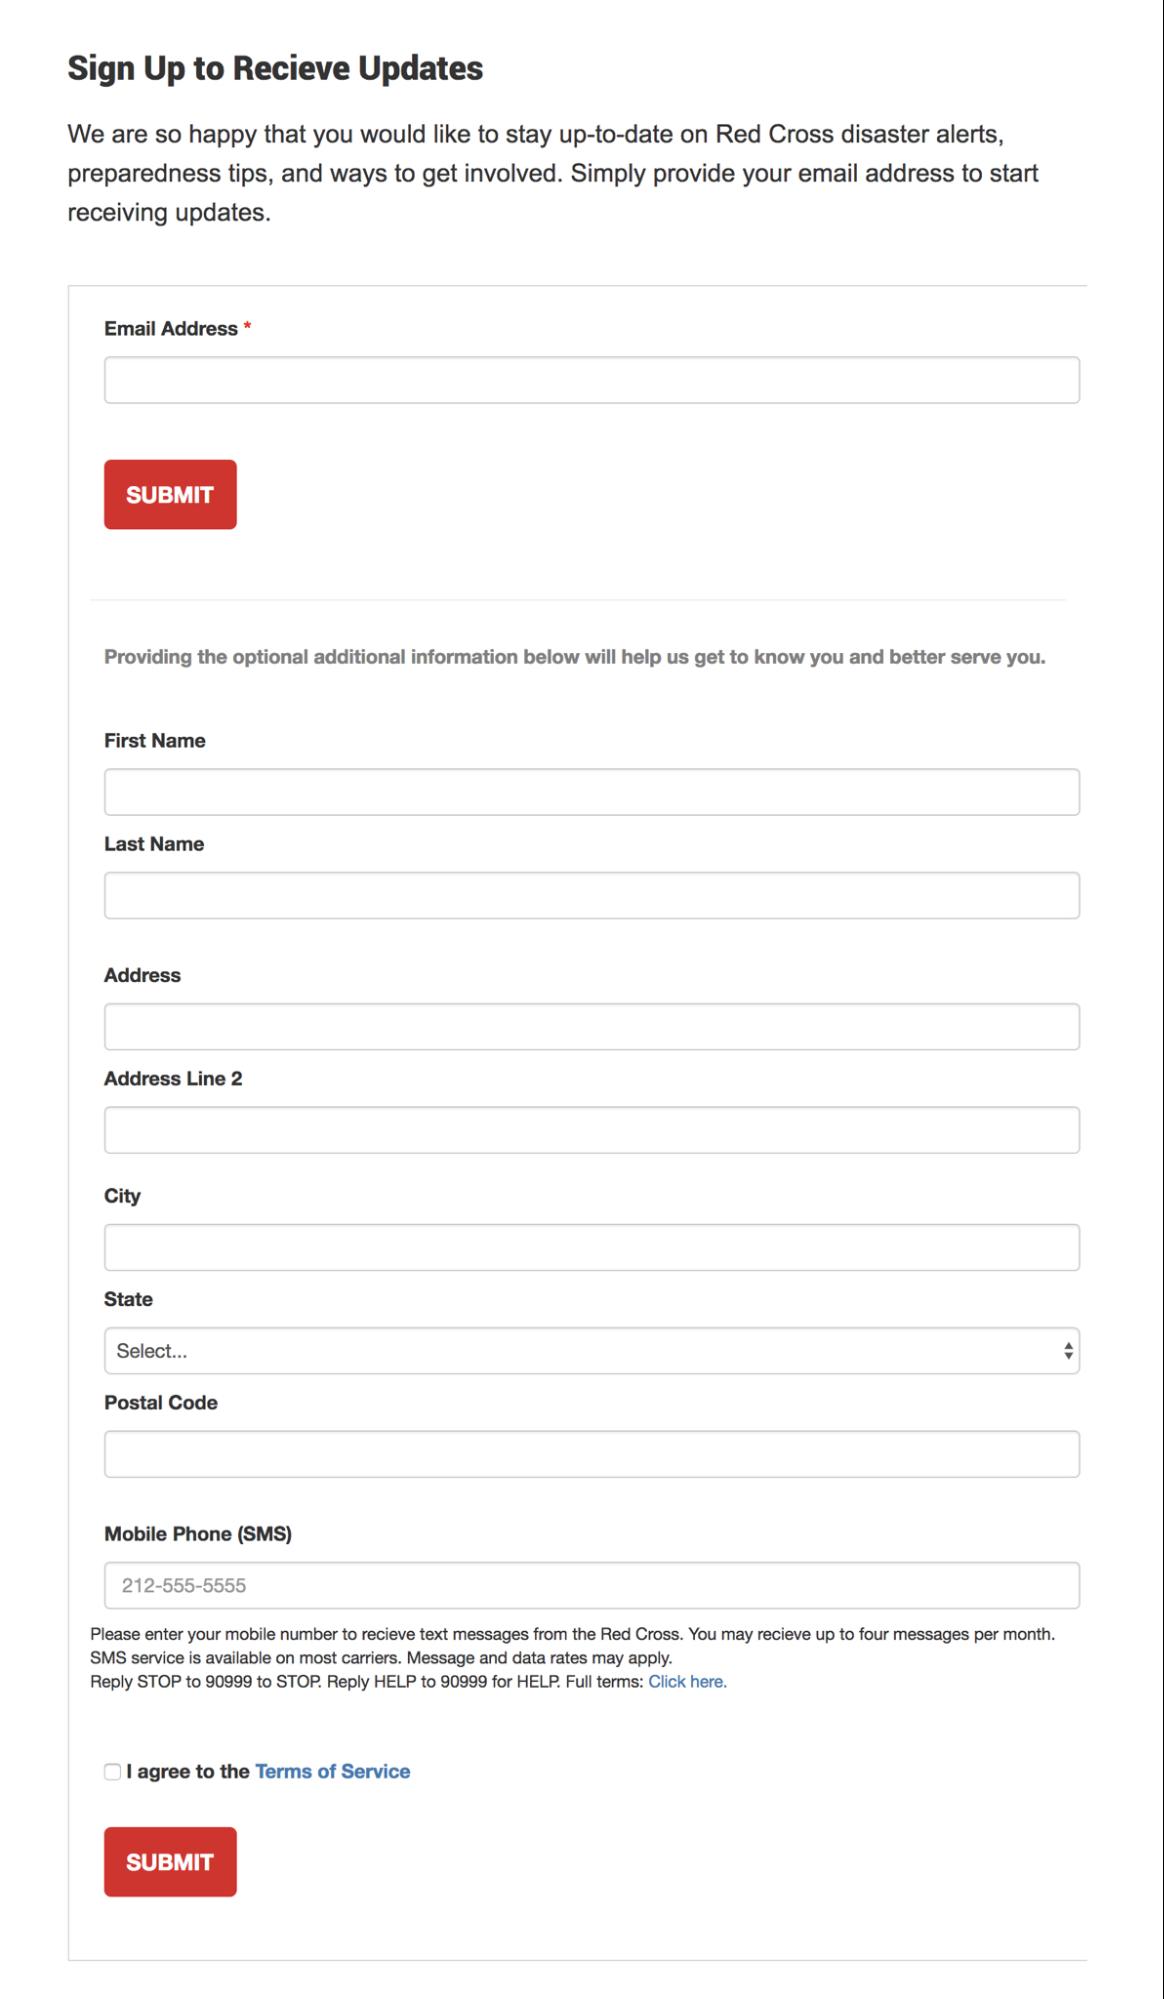 Redcross form to choose personalization for segmentation